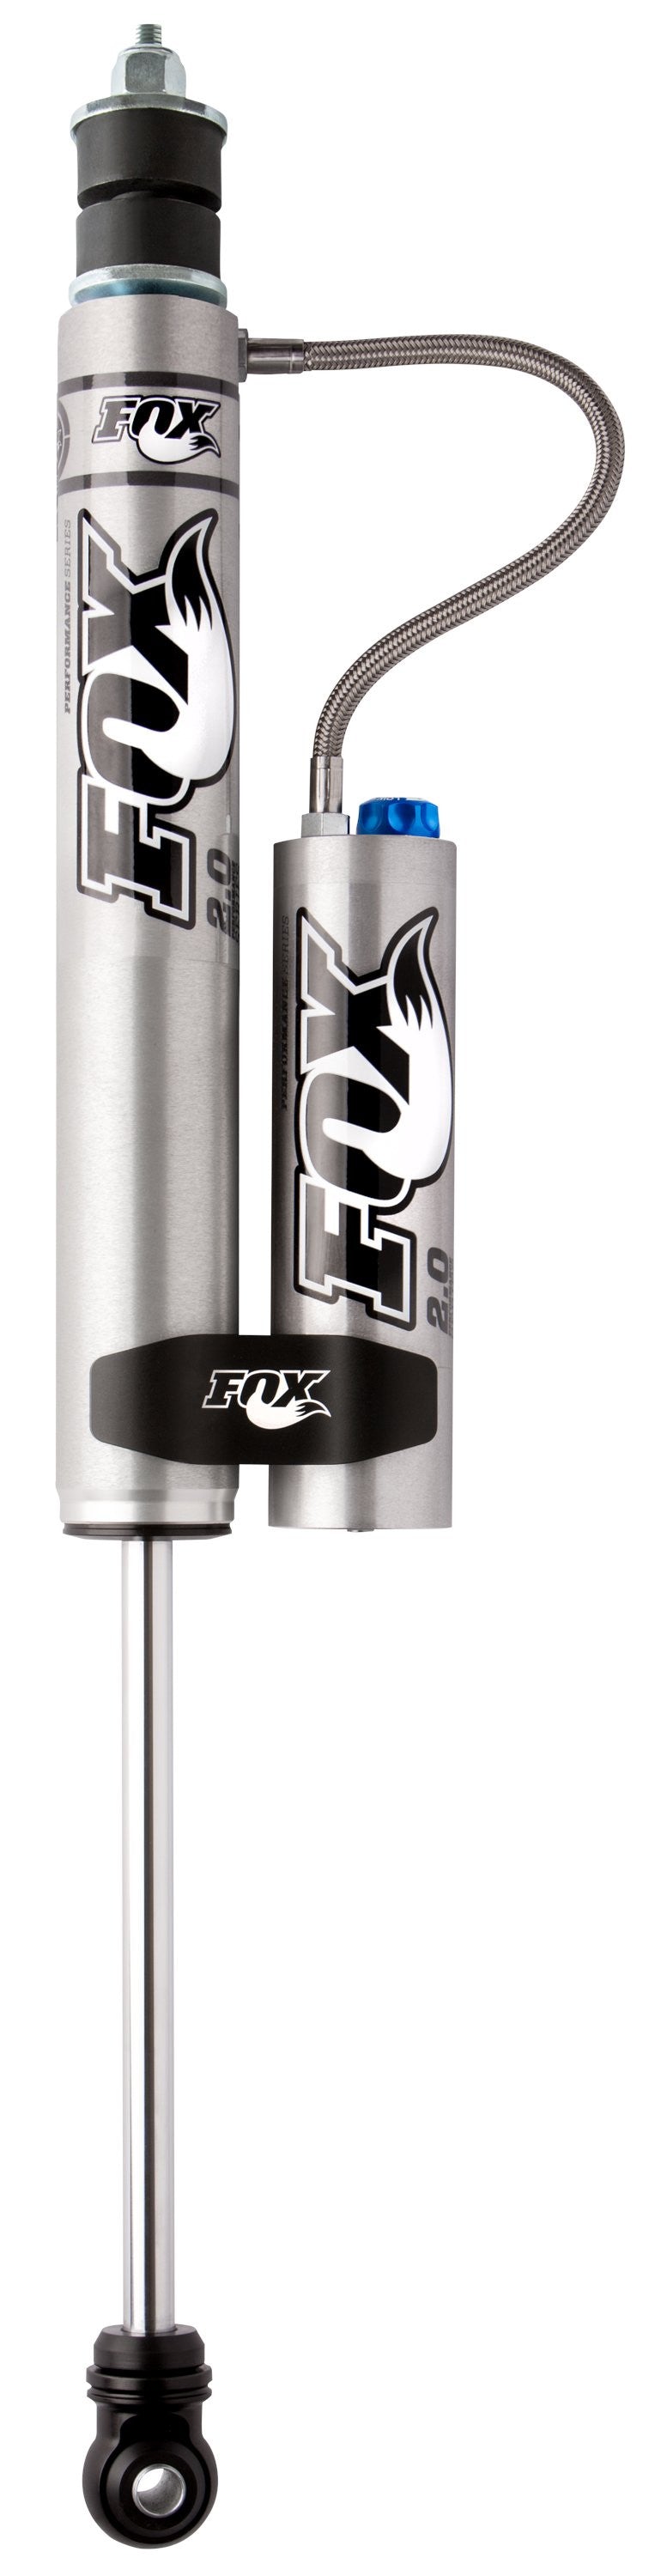 PERFORMANCE SERIES 2.0 SMOOTH BODY RESERVOIR SHOCK - ADJUSTABLE Lift: 4-6; Includes Billet Reservoir Clamp I Does not fit magnetic suspension 2011-2019 GMC Sierra 3500 HD FOX-980-26-966 - 2.0 SHOCK - FOX Offroad Shocks - Texas Complete Truck Center